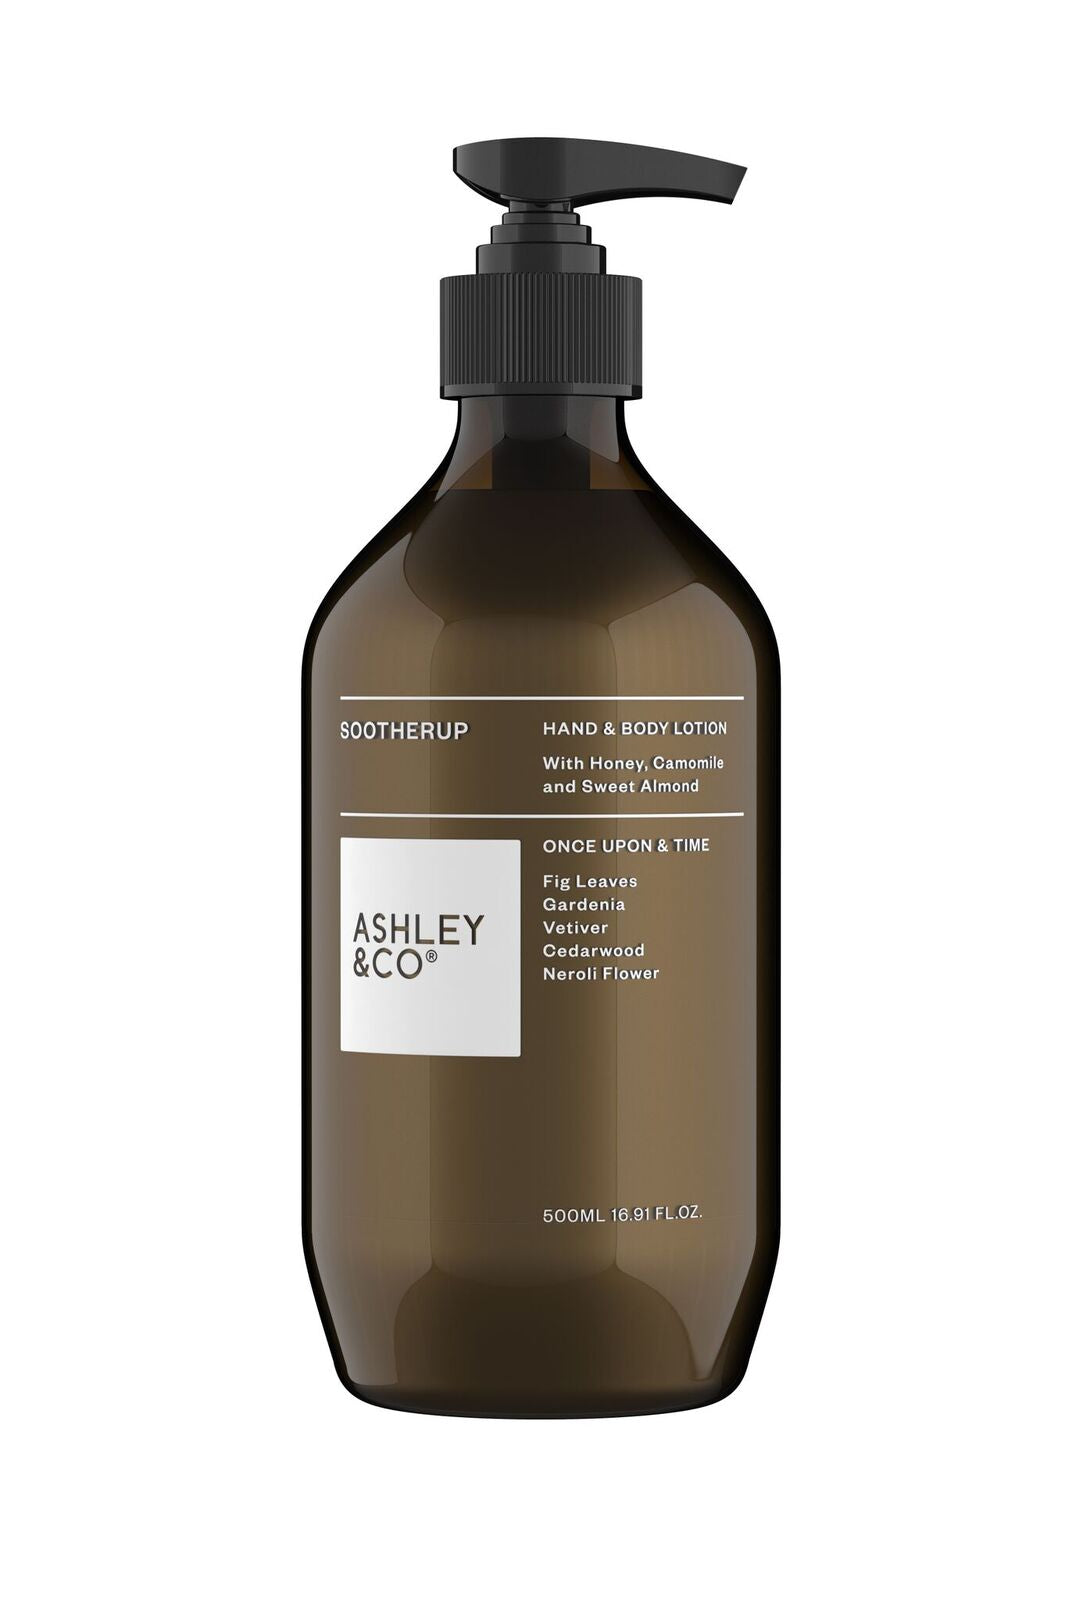 Ashley & Co Soother Up Hand & Body Lotion, Once Upon A Time